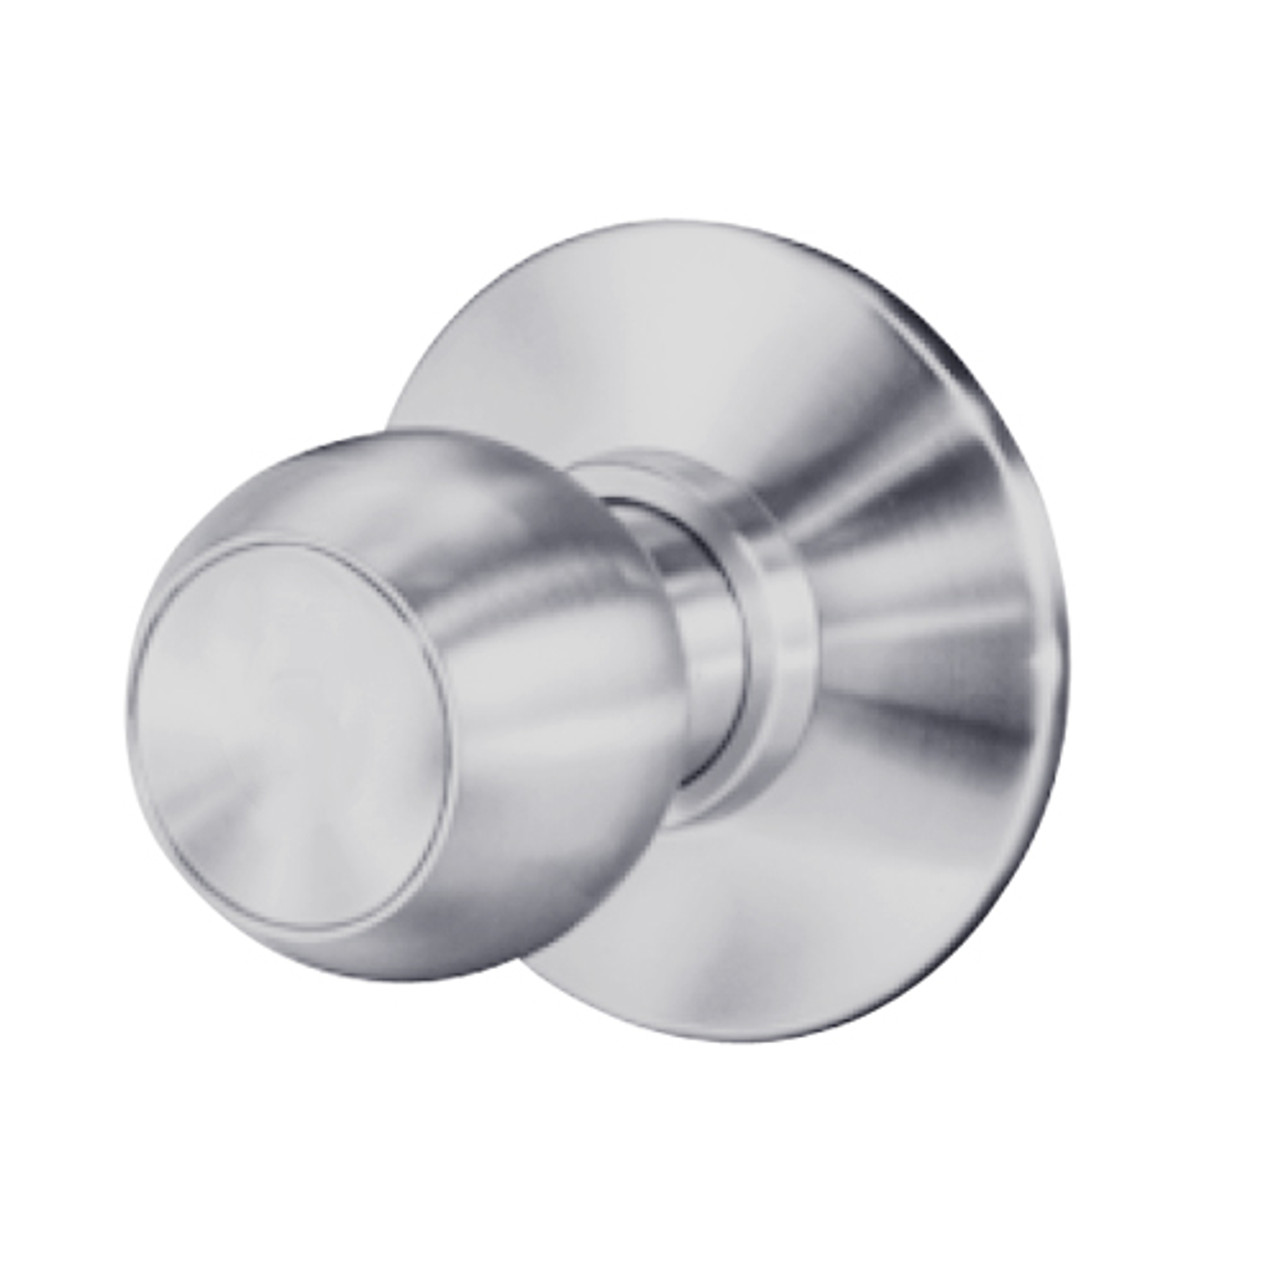 8K30N4DS3626 Best 8K Series Passage Heavy Duty Cylindrical Knob Locks with Round Style in Satin Chrome